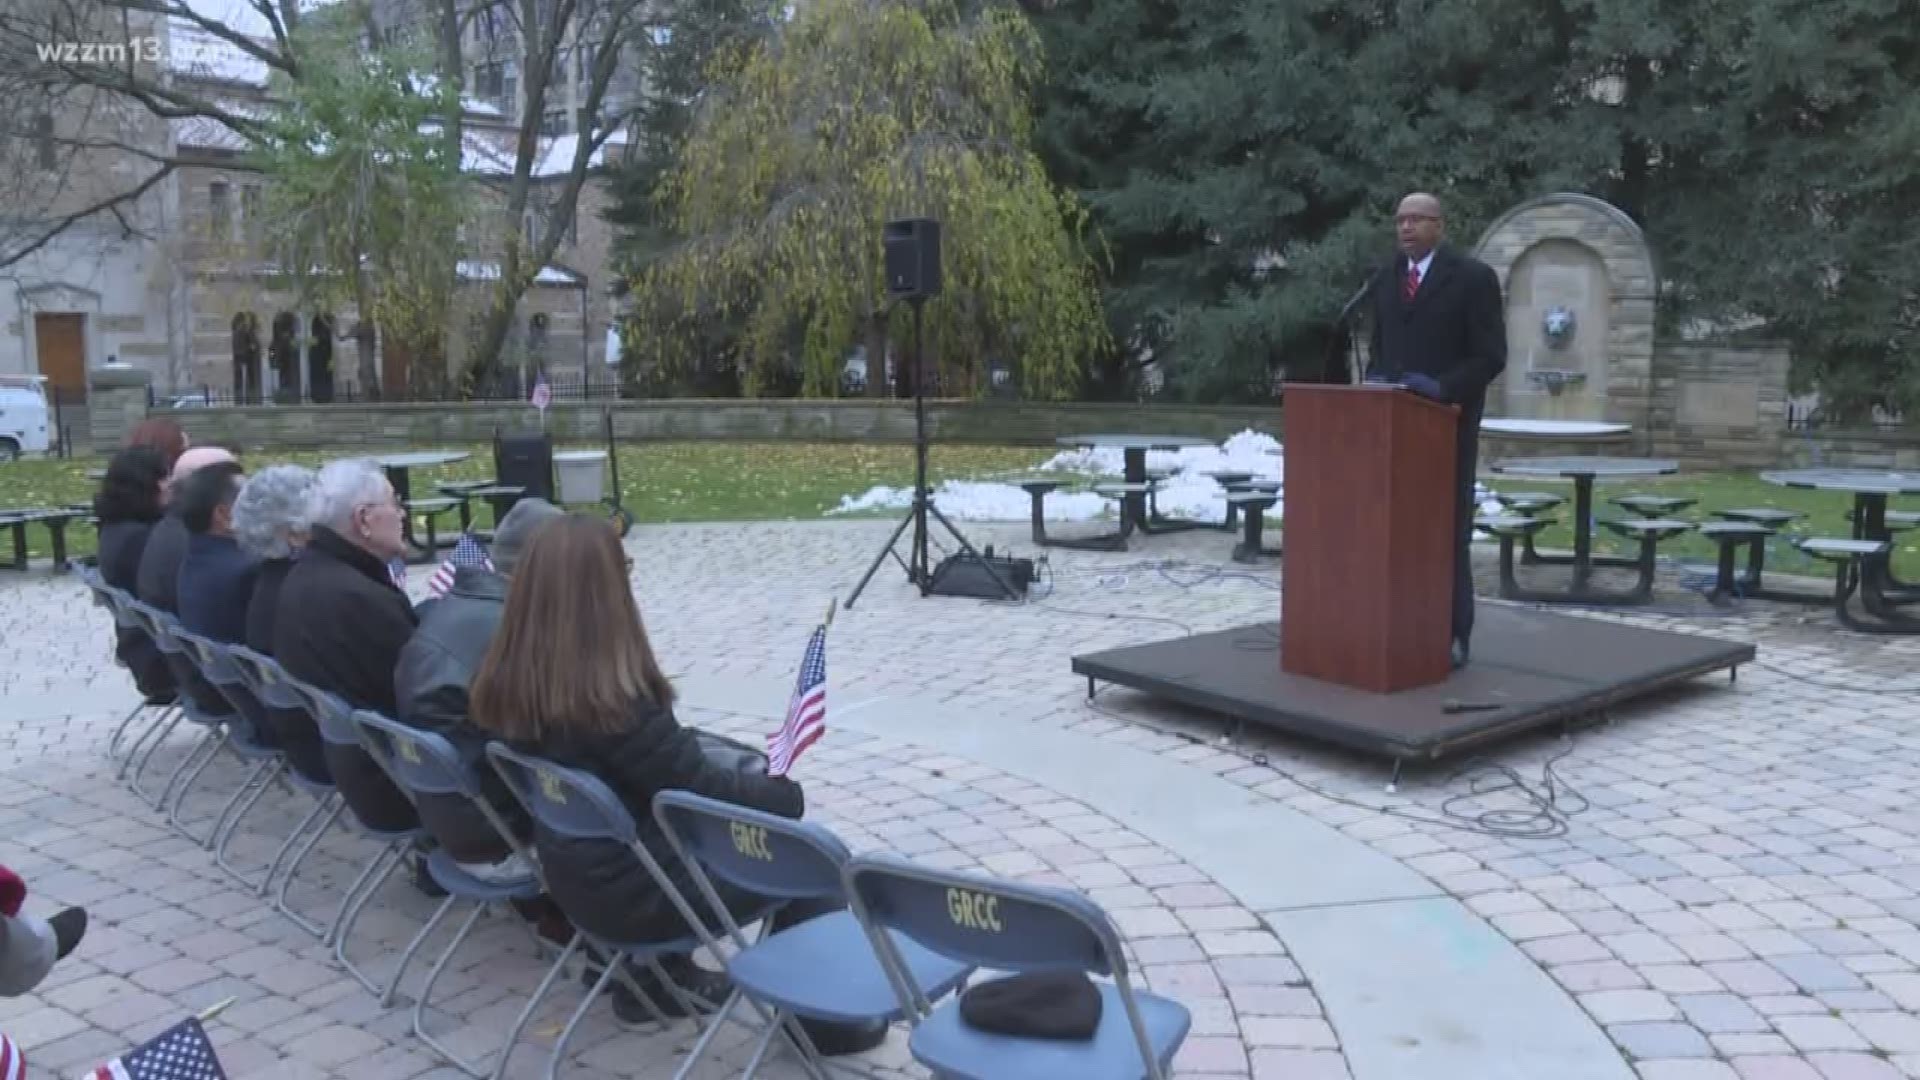 GRCC holds special Veterans Day ceremony